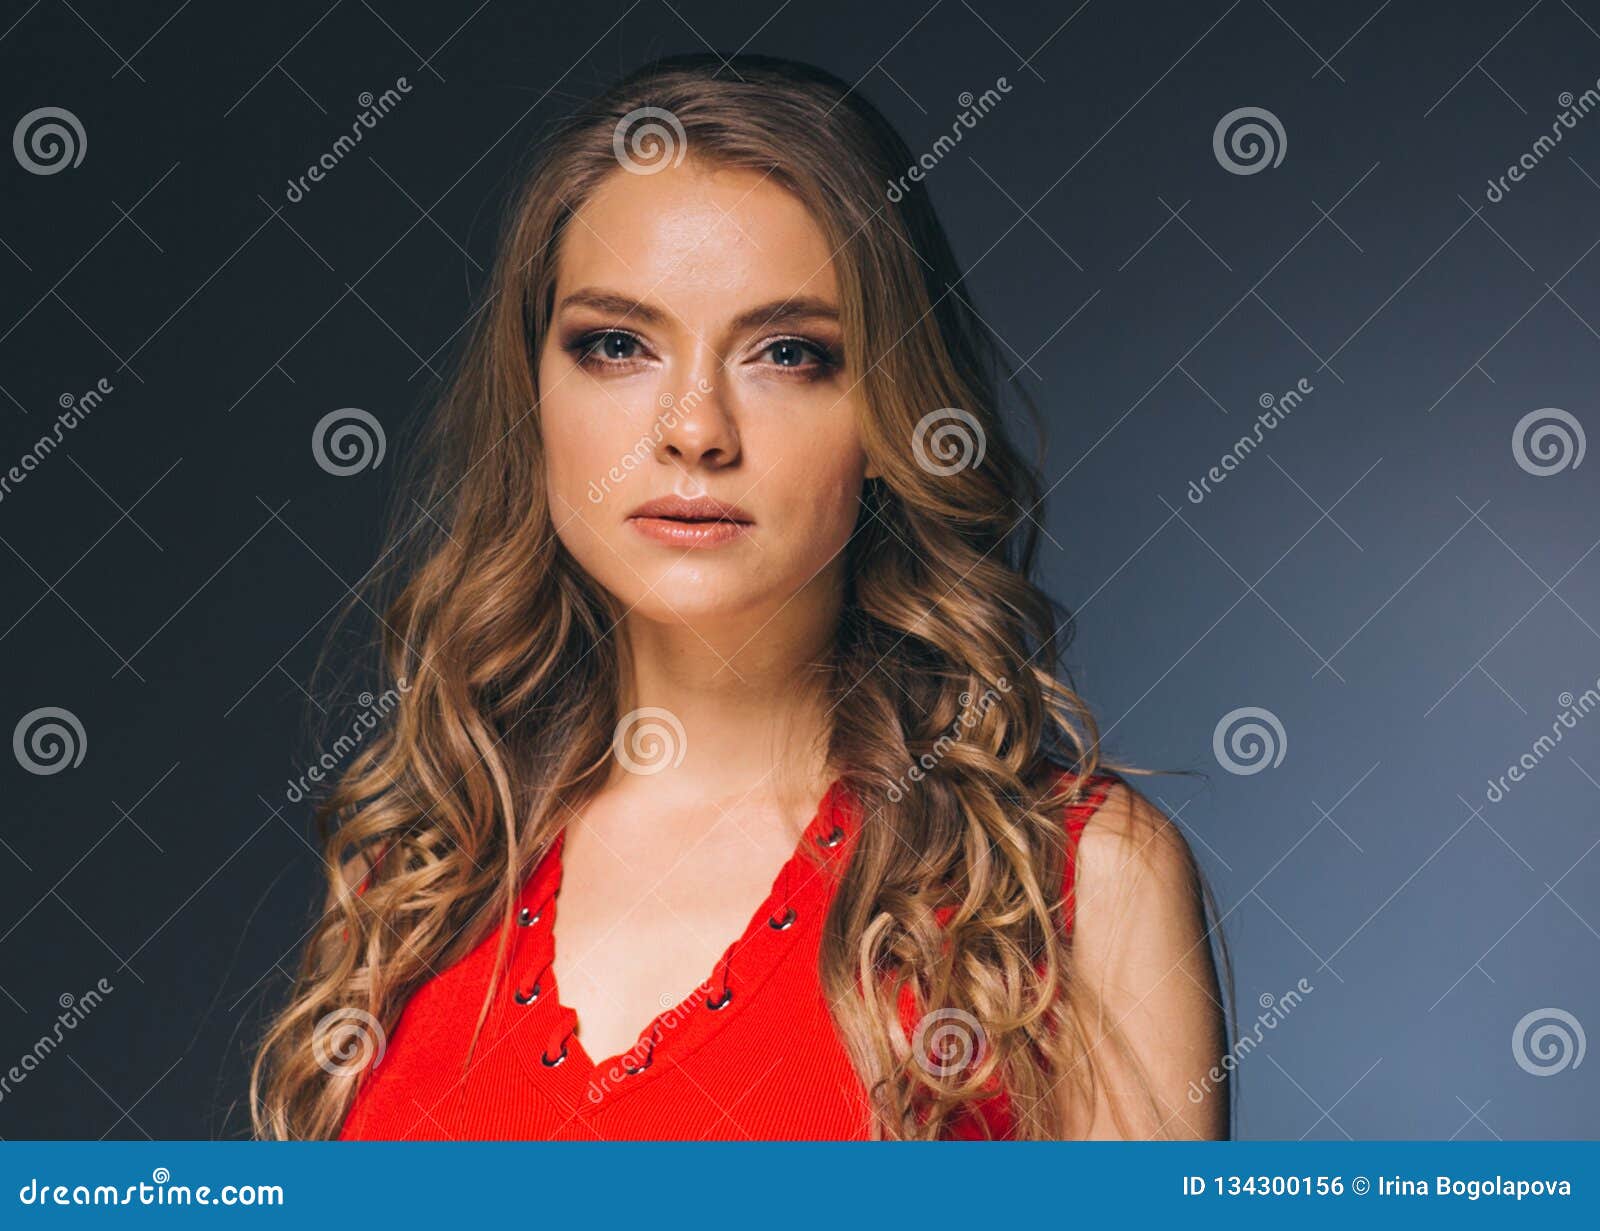 Woman in Red Dress with Long Blonde Hair Stock Photo - Image of motion ...